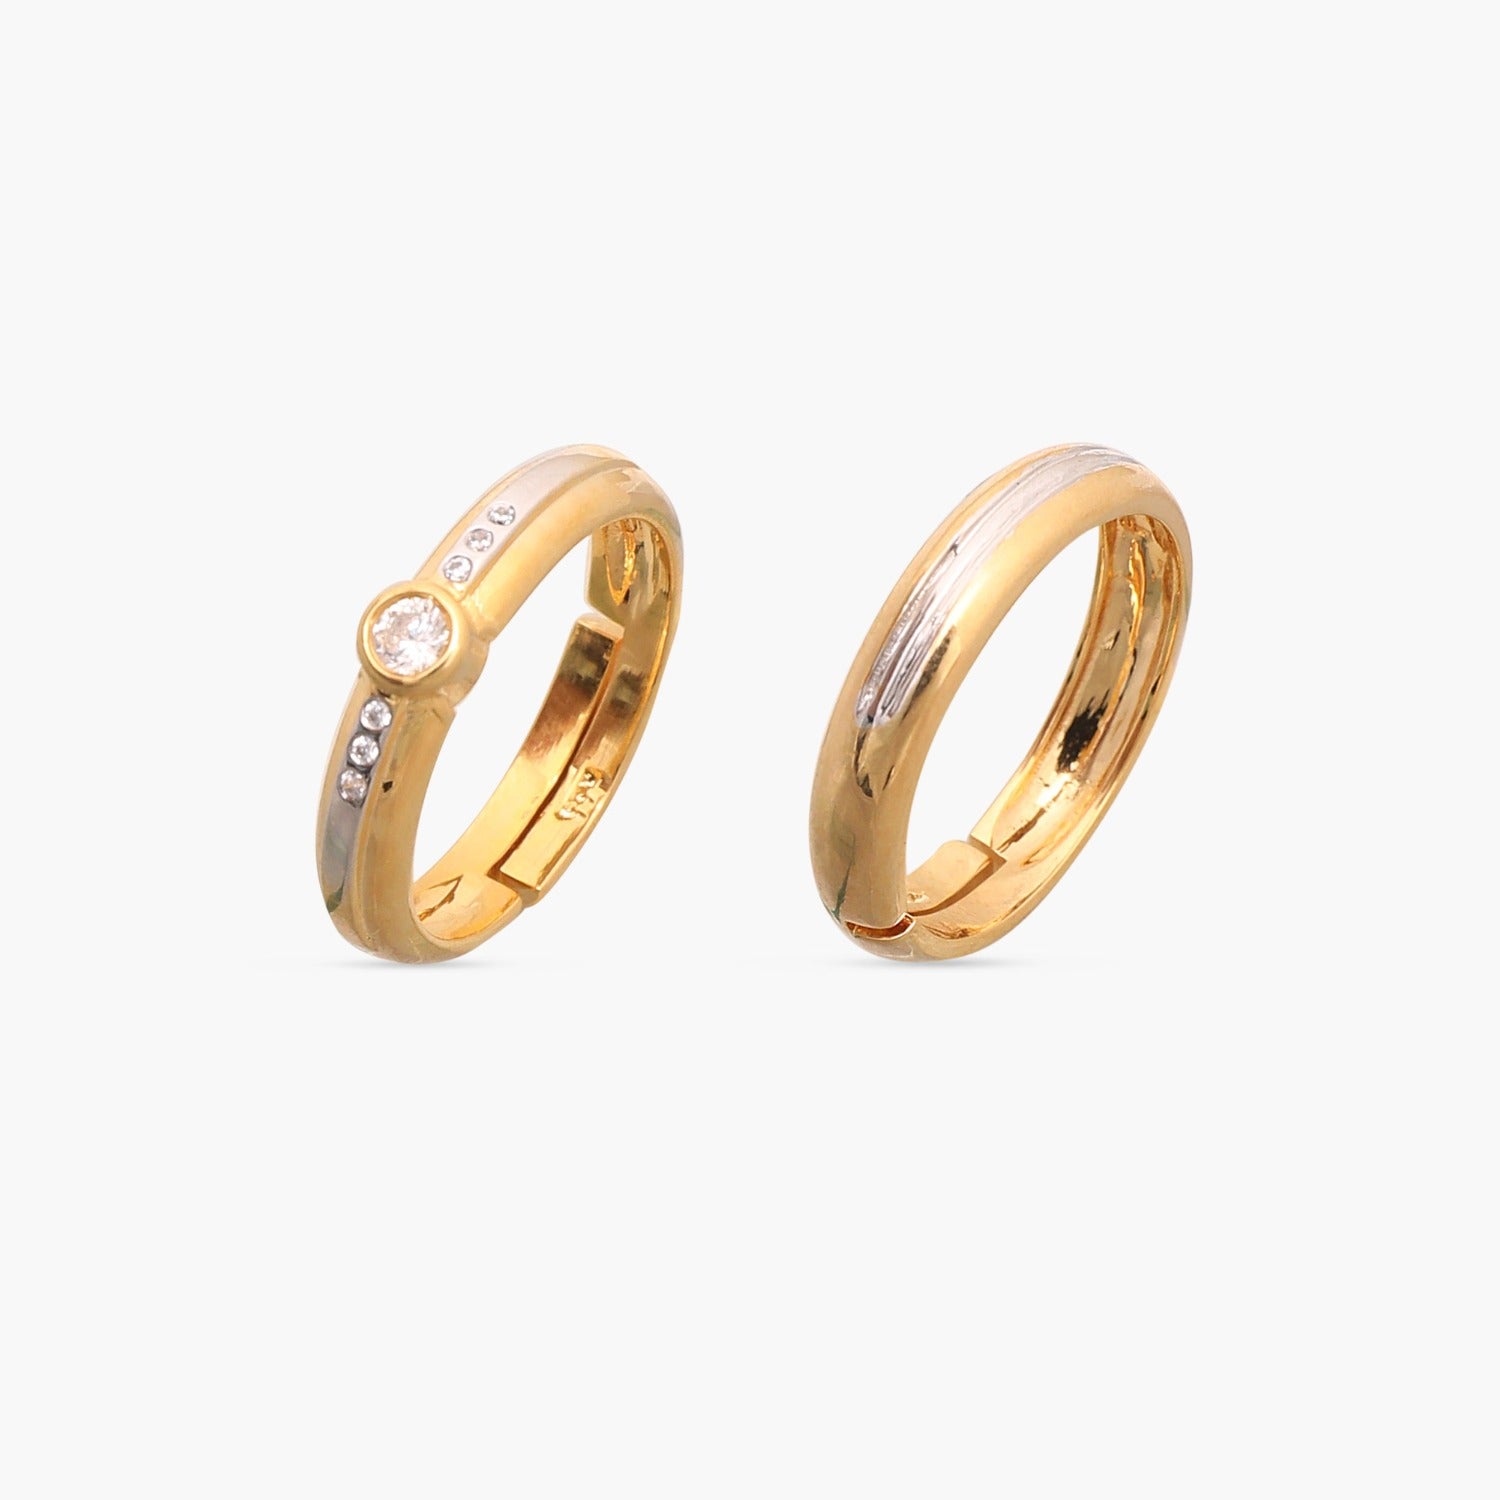 Buy silver couple rings for lovers non adjustable in India @ Limeroad